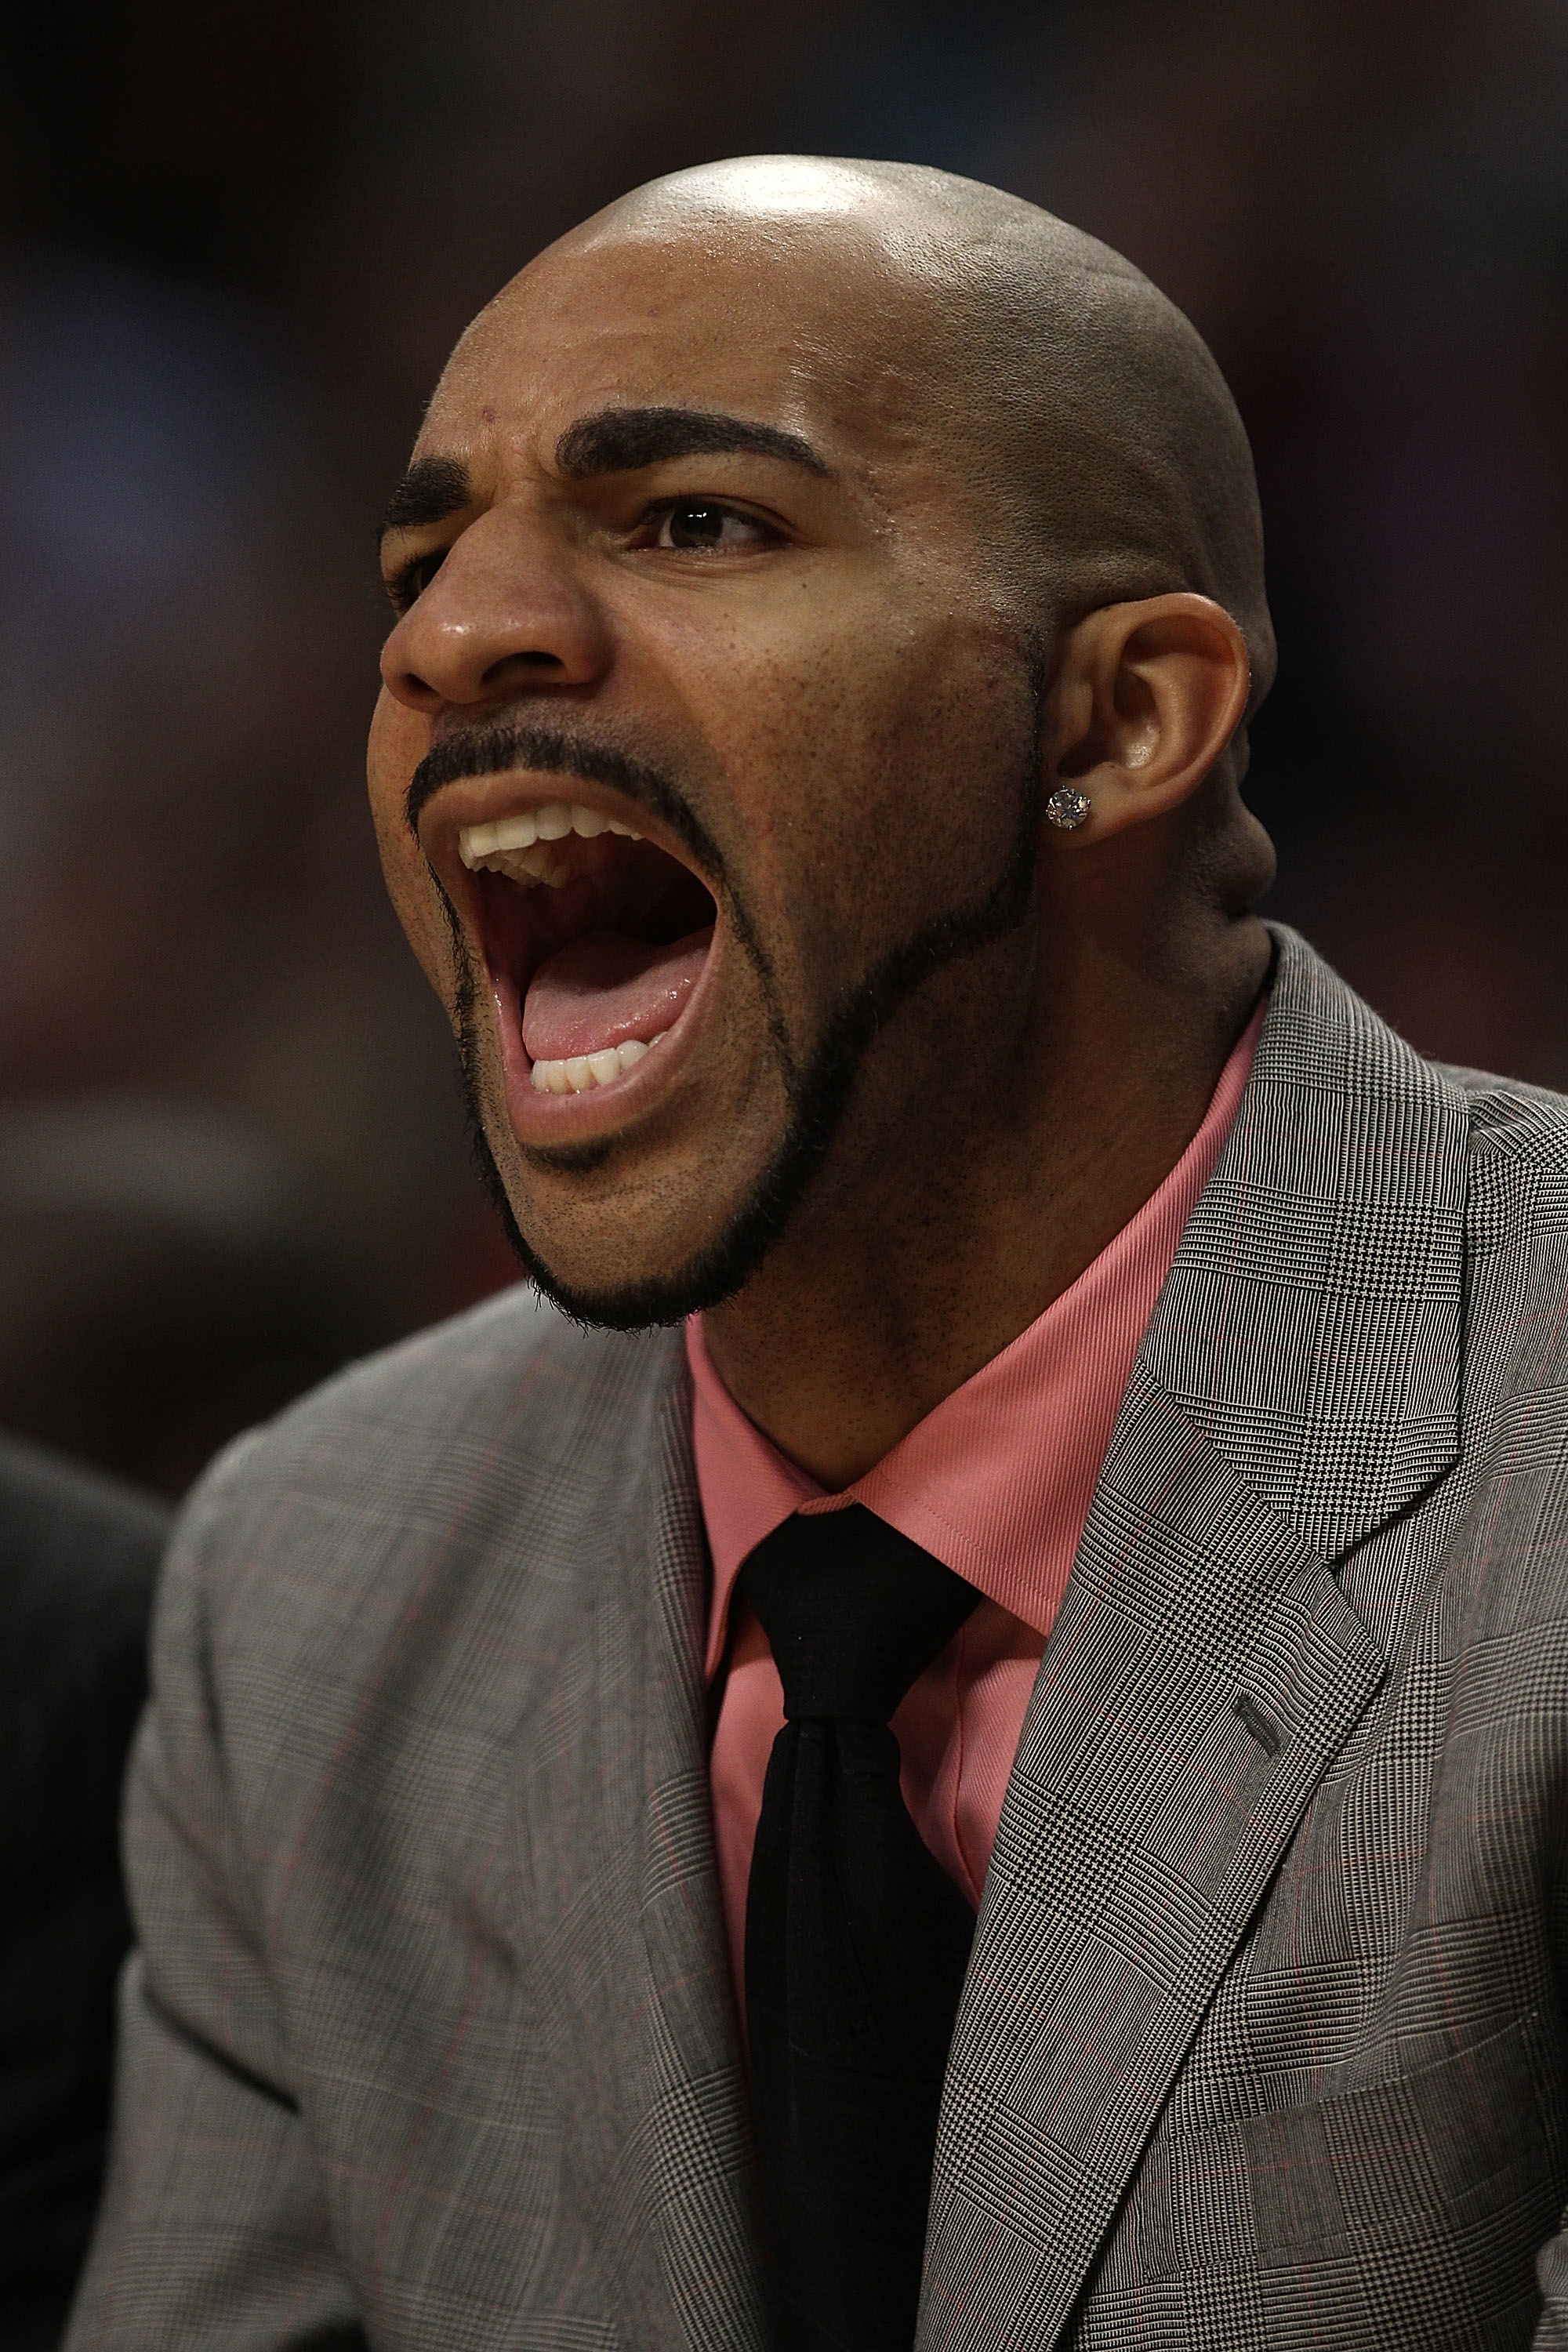 CHICAGO - NOVEMBER 01: Carlos Boozer #5 of the Chicago Bulls yells at a referee from the bench during a game against the Portland Trail Blazers at the United Center on November 1, 2010 in Chicago, Illinois. The Bulls defeated the Trail Blazers 110-98. NOT